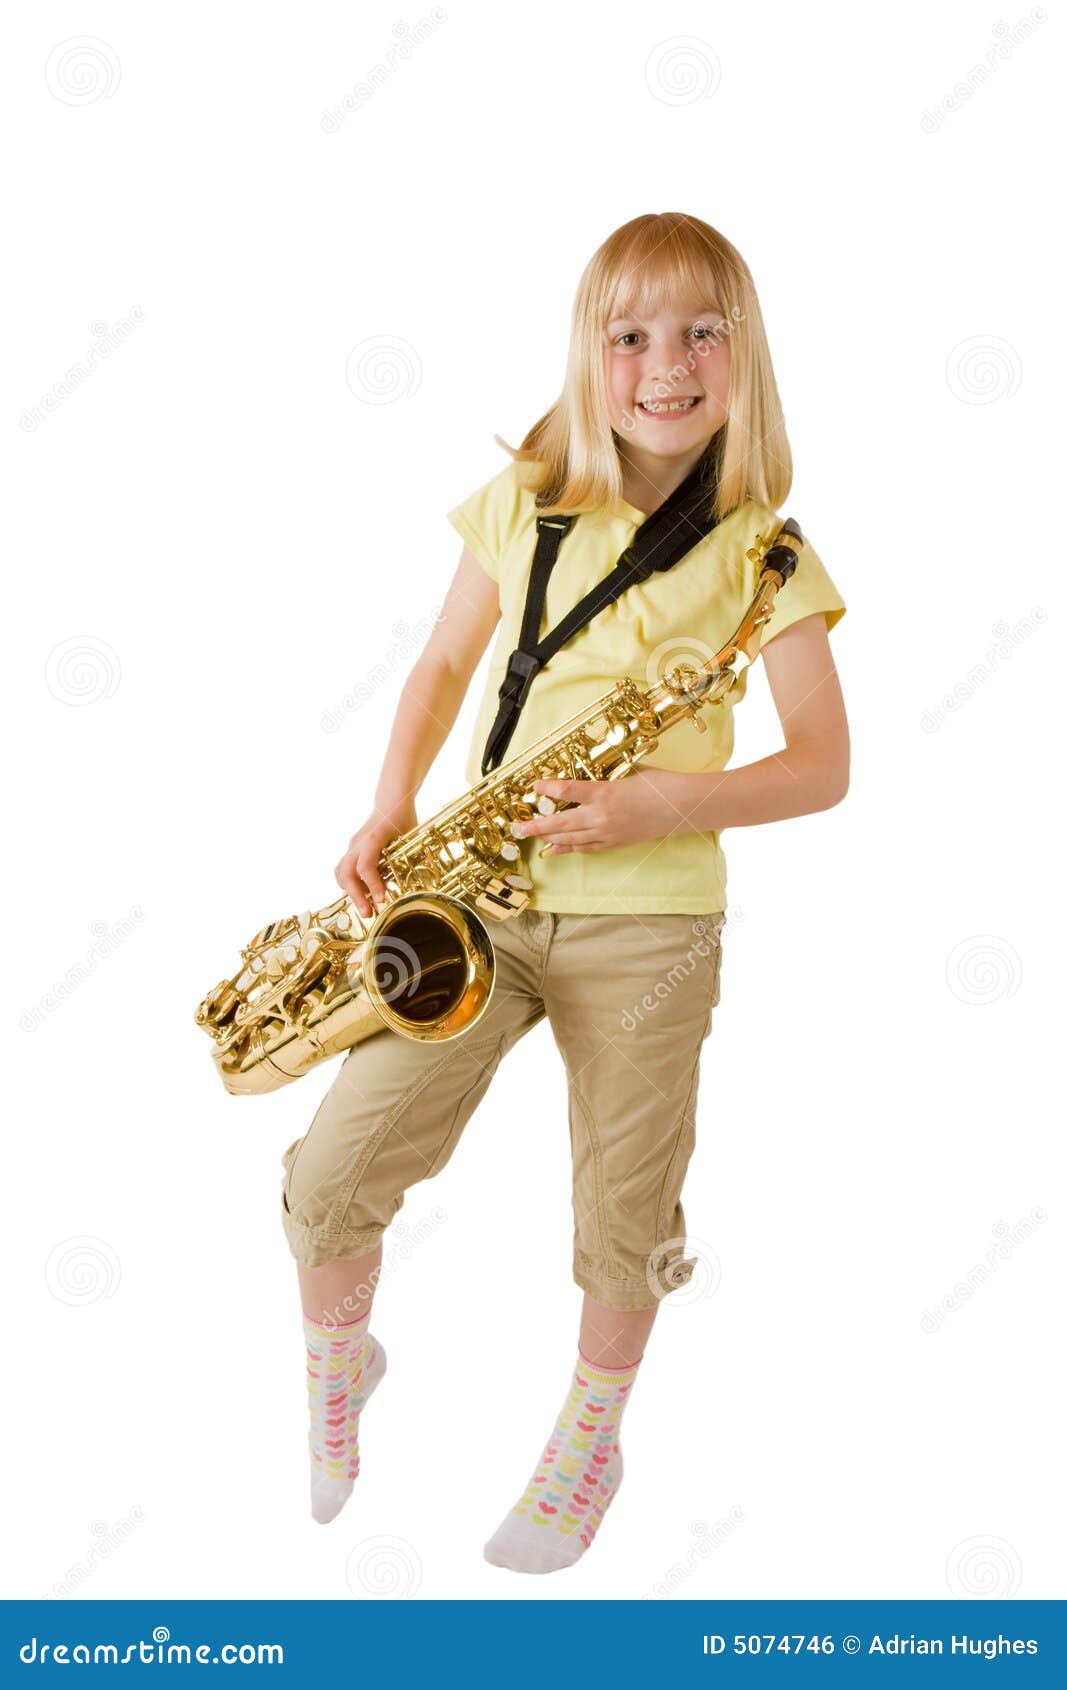 Young girl practising the saxophone against a white background.